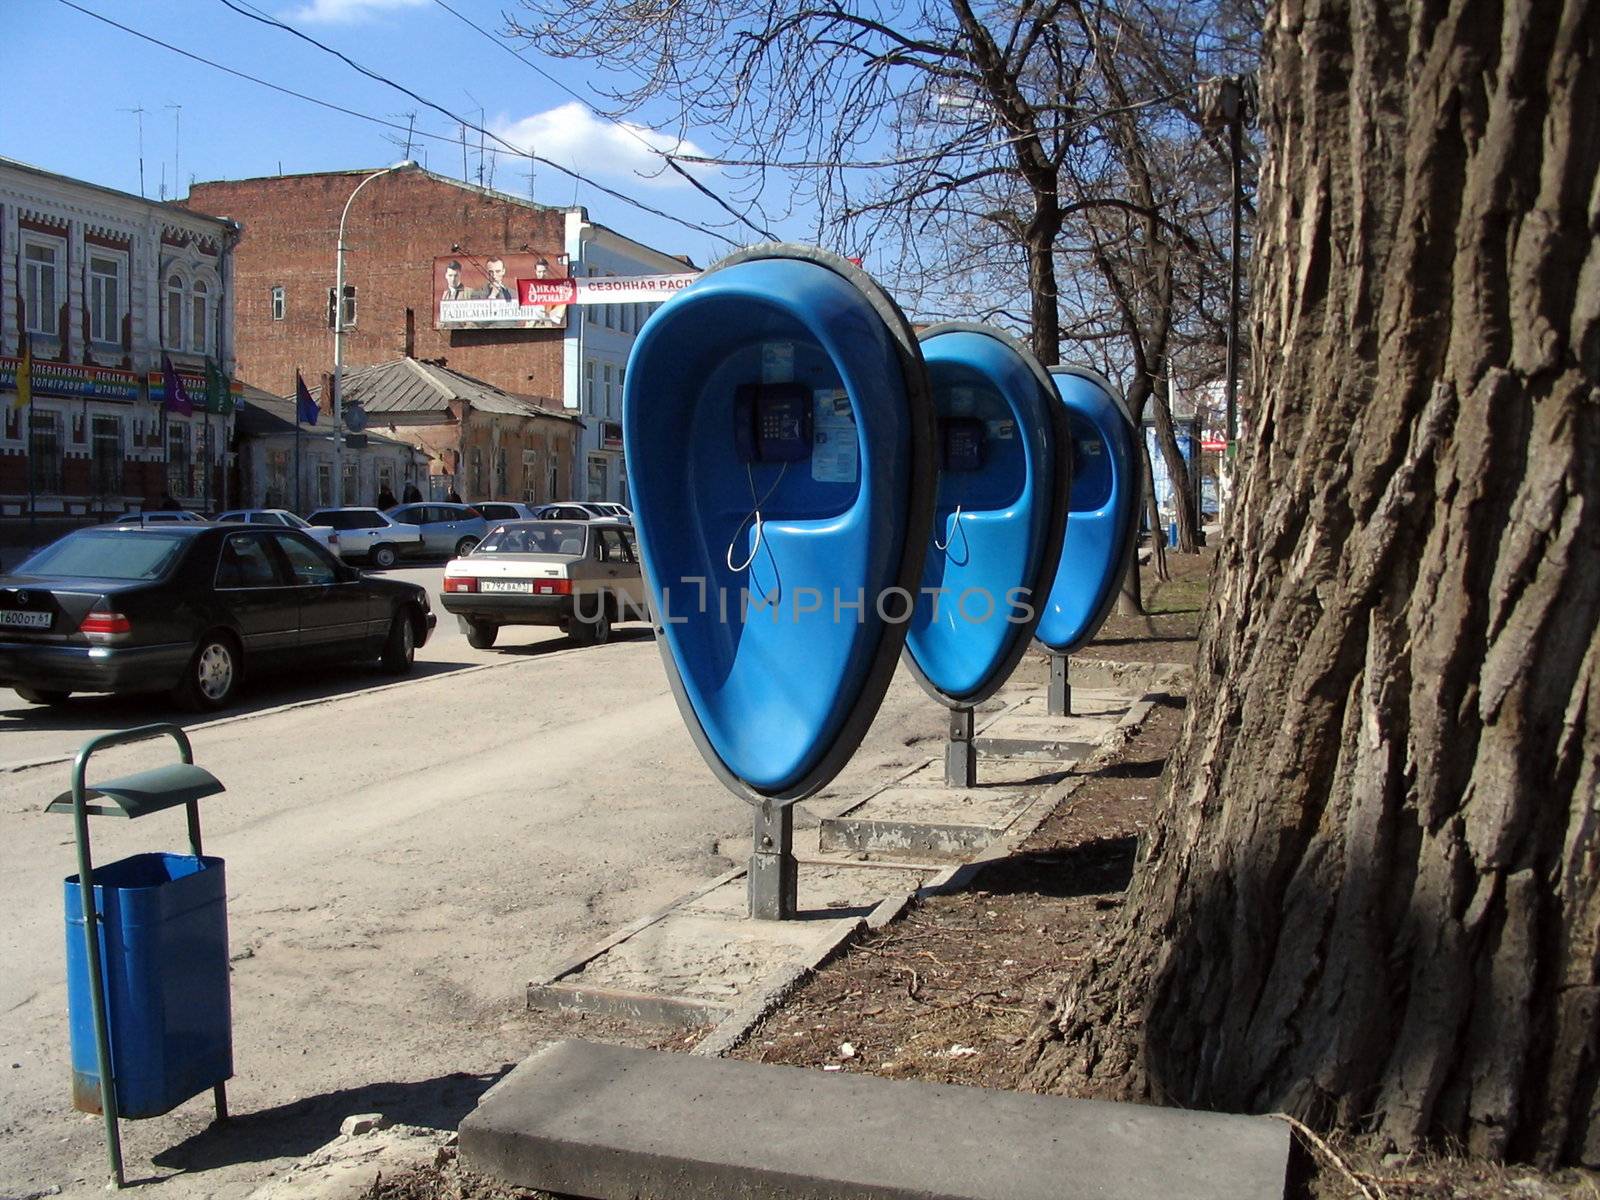 Telephone booths by ichip